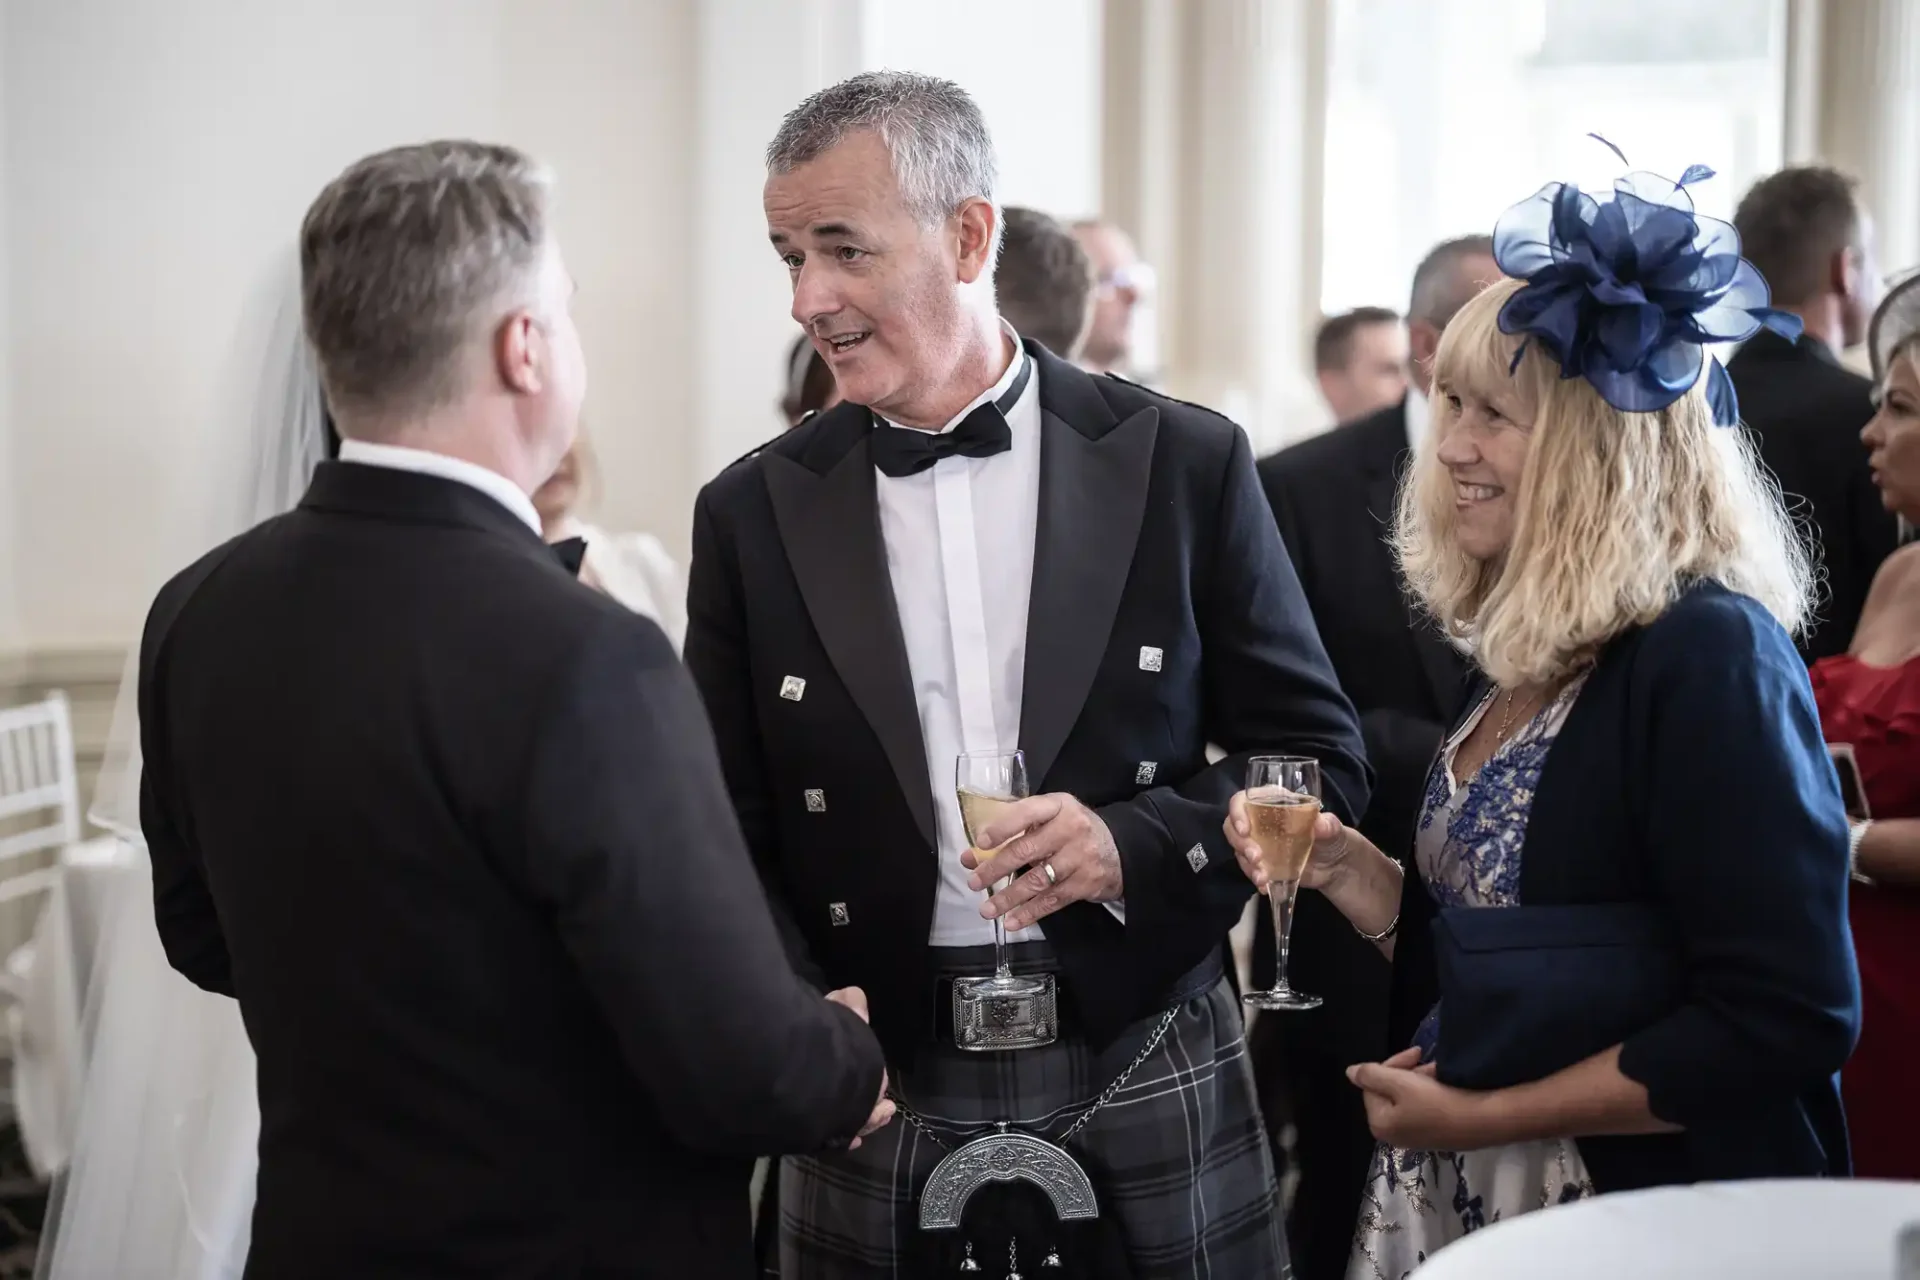 Two men and a woman engaging in conversation at a formal event, with one man dressed in a traditional kilt and holding a drink.